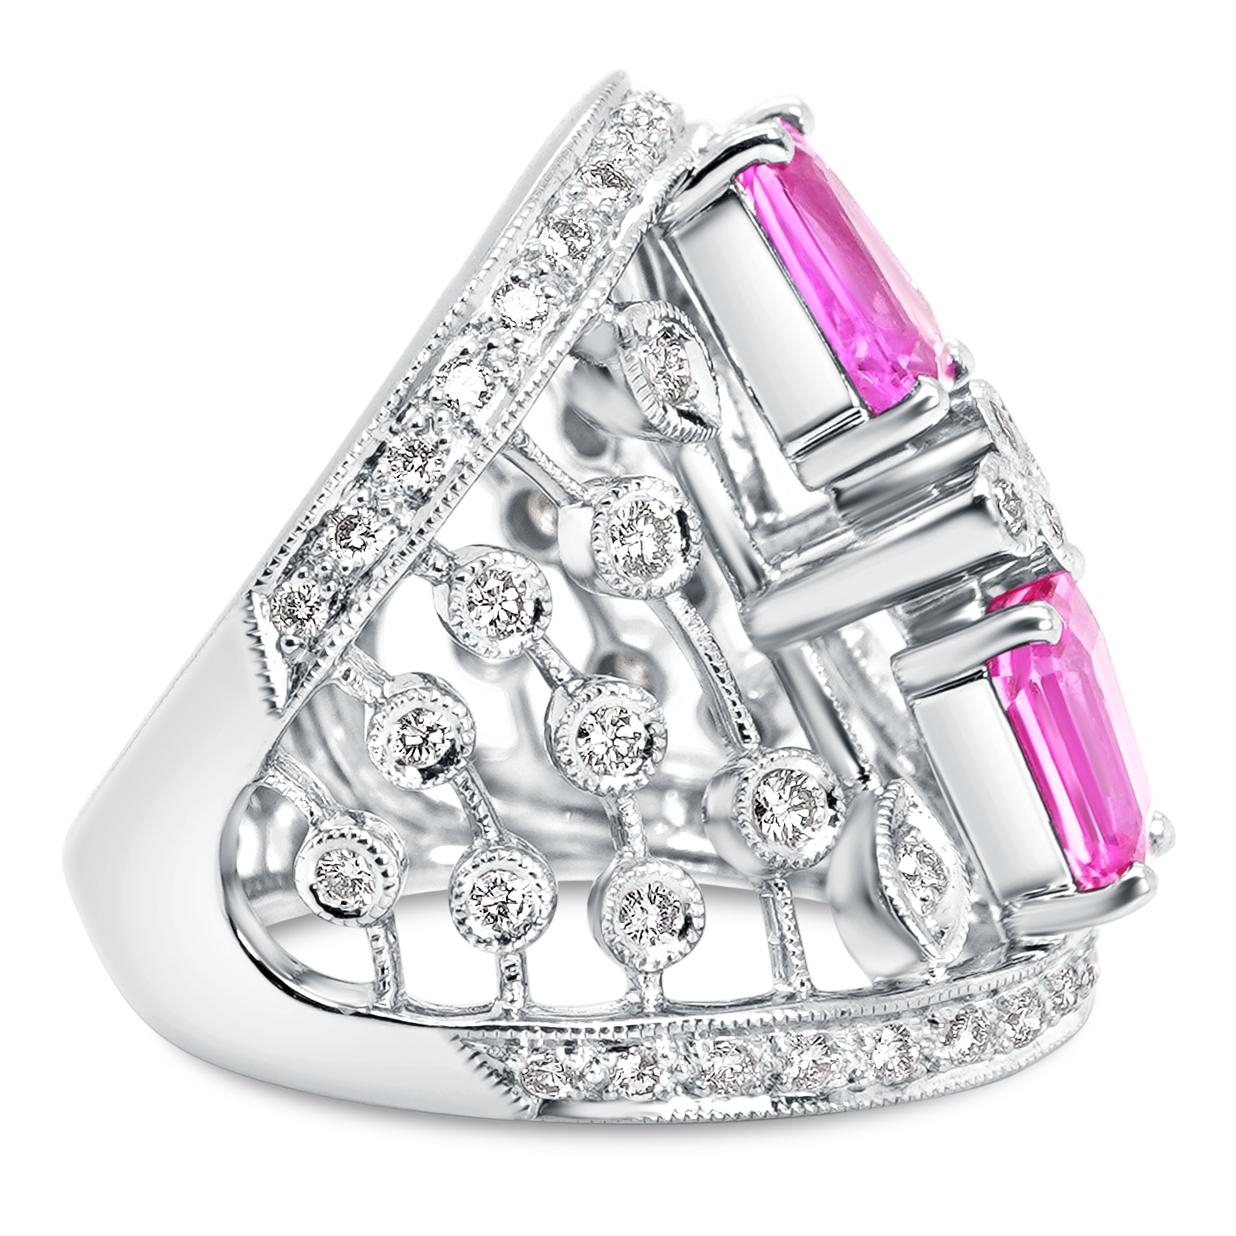 This precious gemstone belongs to the corundum mineral family. It is sought-after for its beautiful hue, which can range from pale pink to vivid magenta. Currently, stones that display a rich pink hue are extremely sought-after.
In this ring